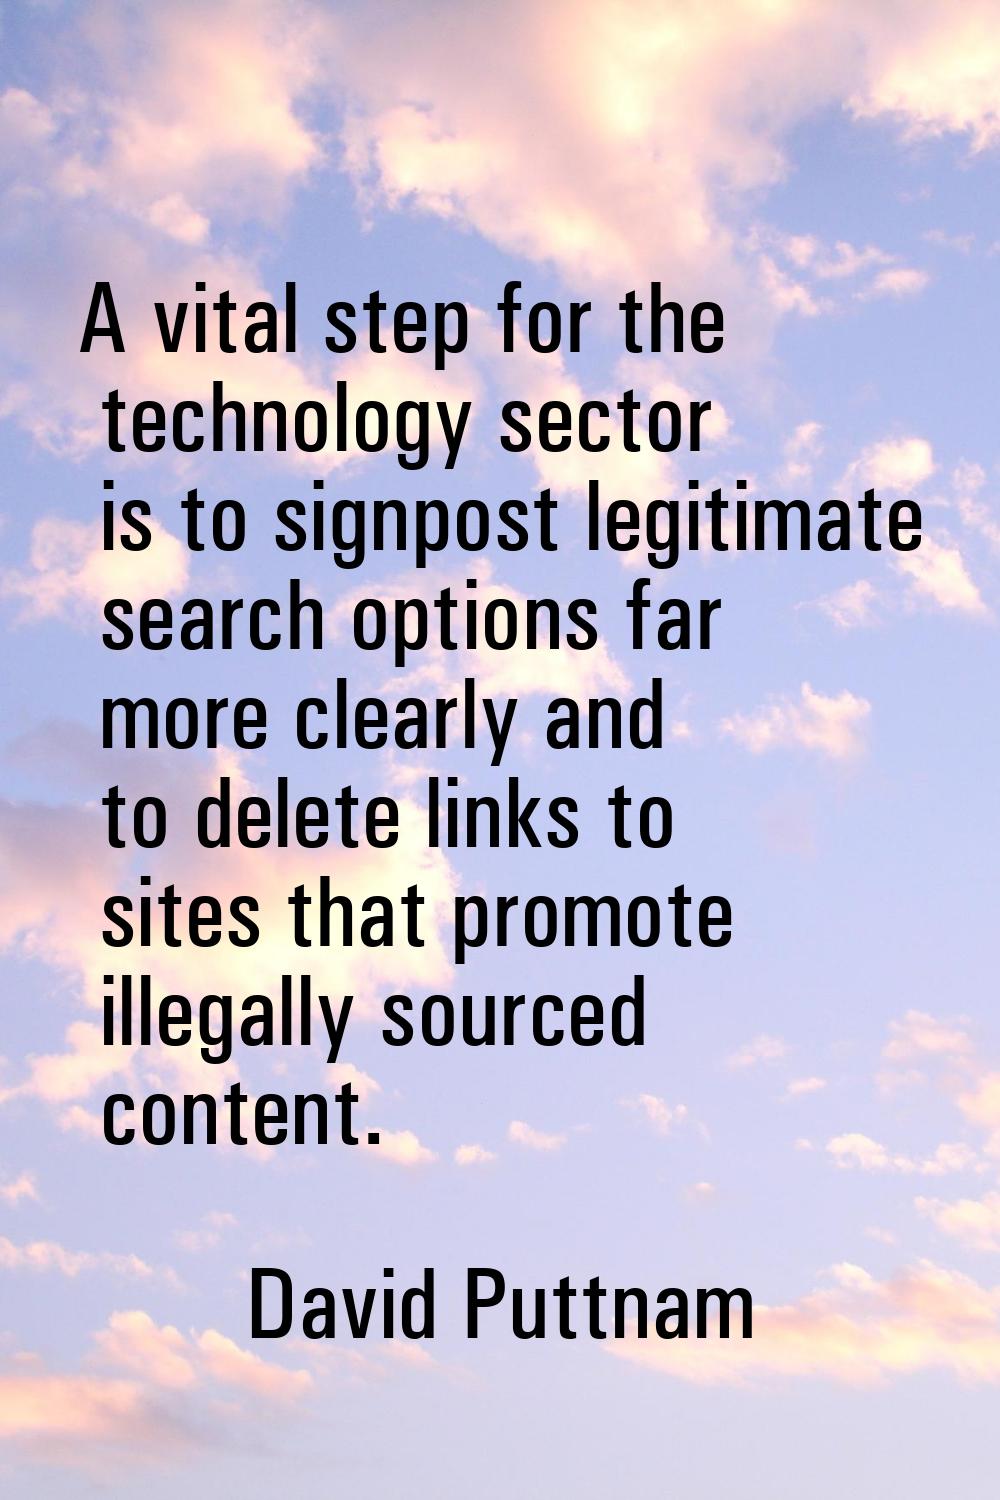 A vital step for the technology sector is to signpost legitimate search options far more clearly an